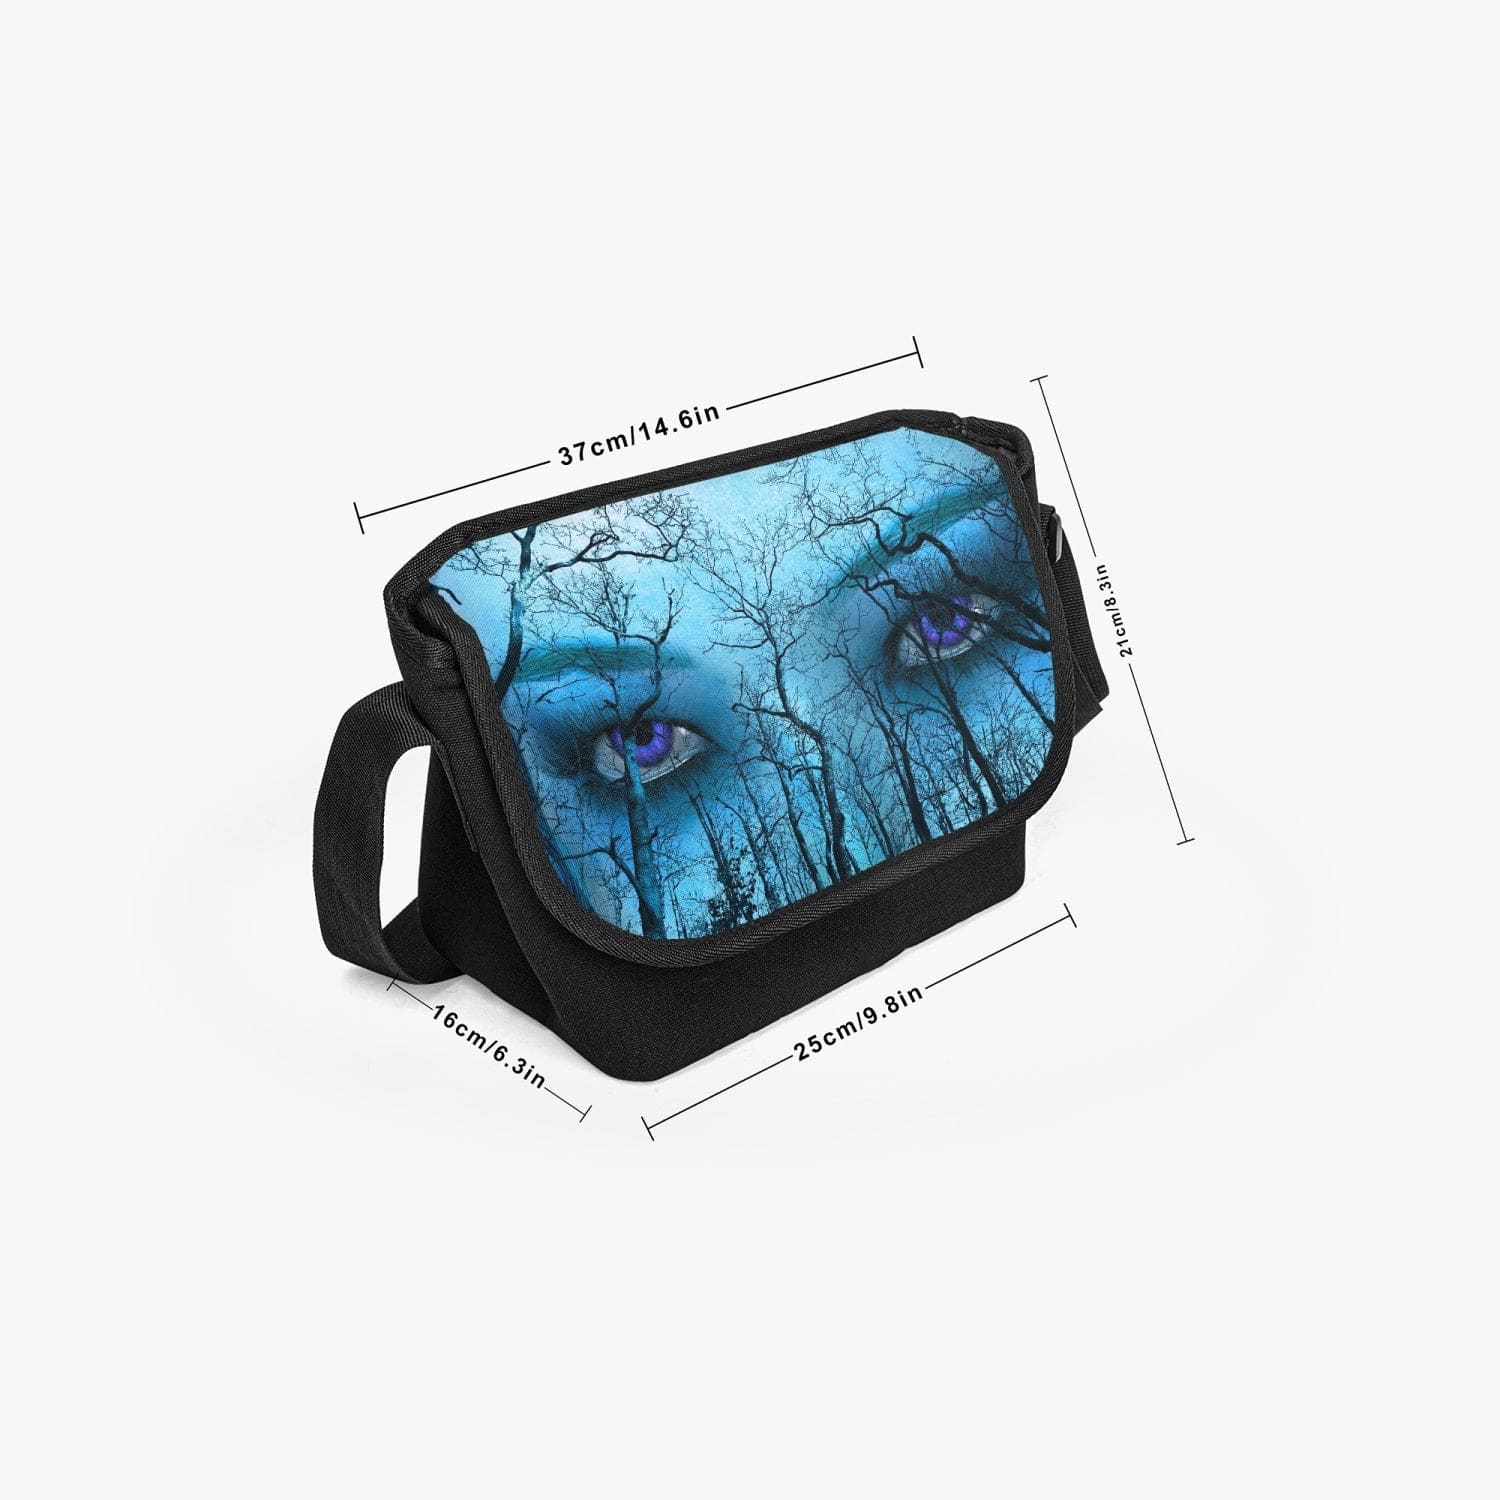 The dimensions of this messenger bag in a gothic supernatural theme featuring purple eyes and blue aqua tones with a naturecore forest theme are 25cm wide, 16cm deep, 21cm high